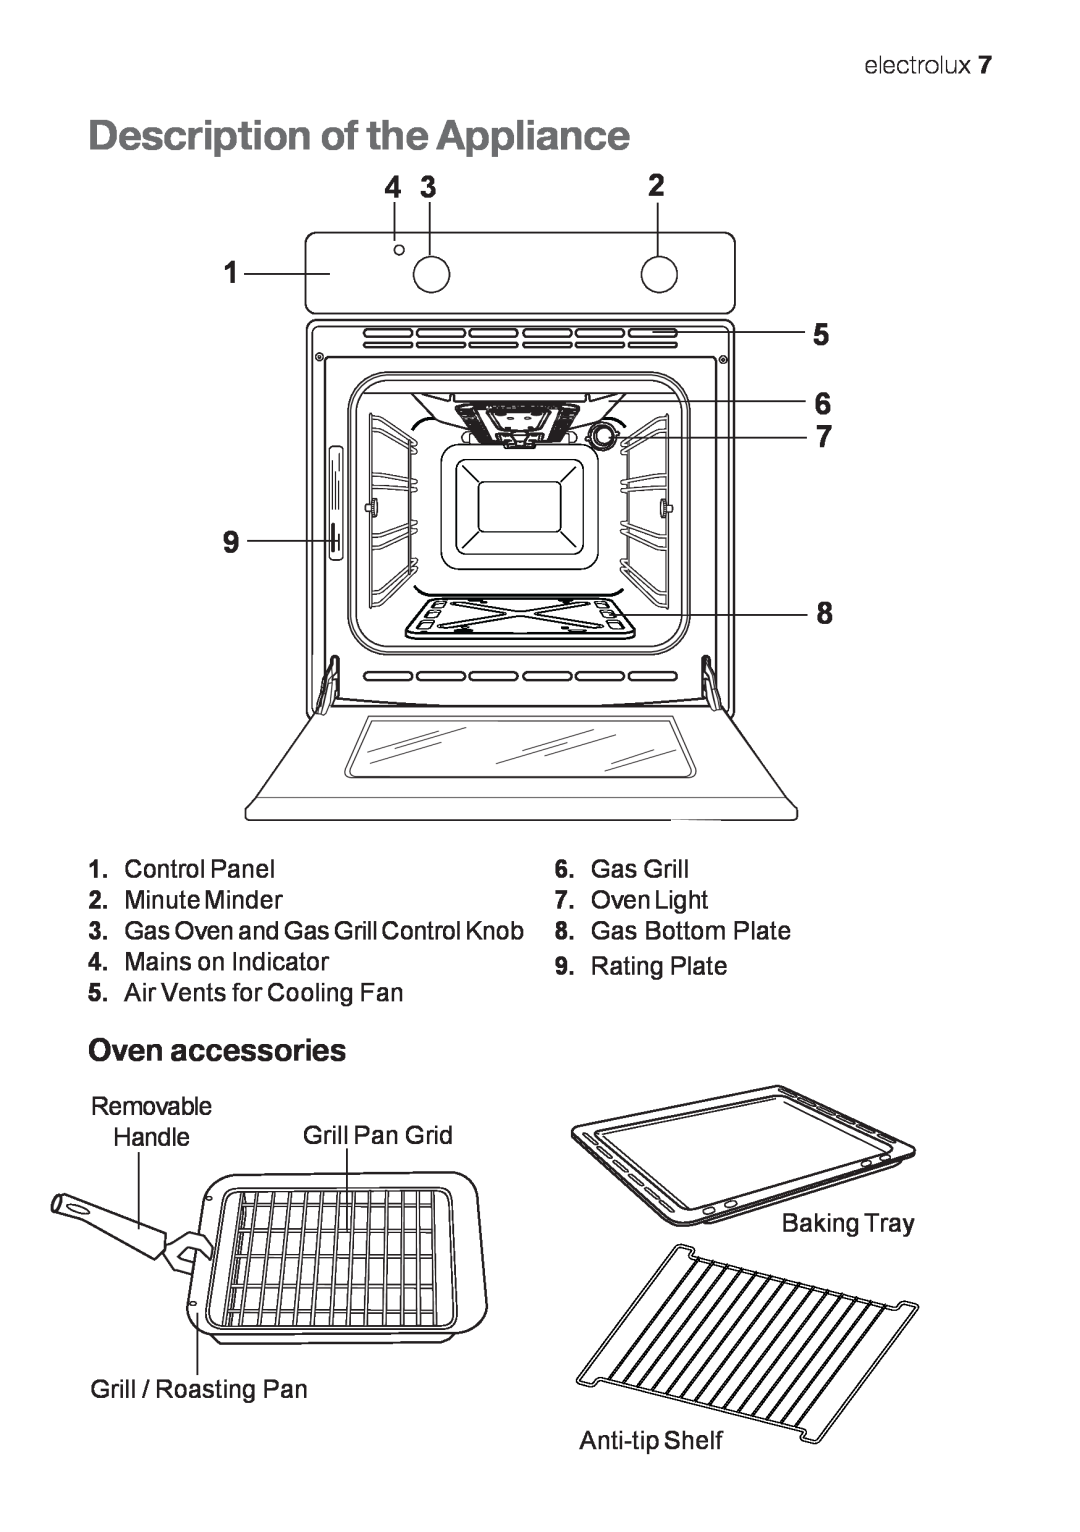 Electrolux EOG 10000 Description of the Appliance, Oven accessories, Control Panel, Gas Grill, Minute Minder, Oven Light 